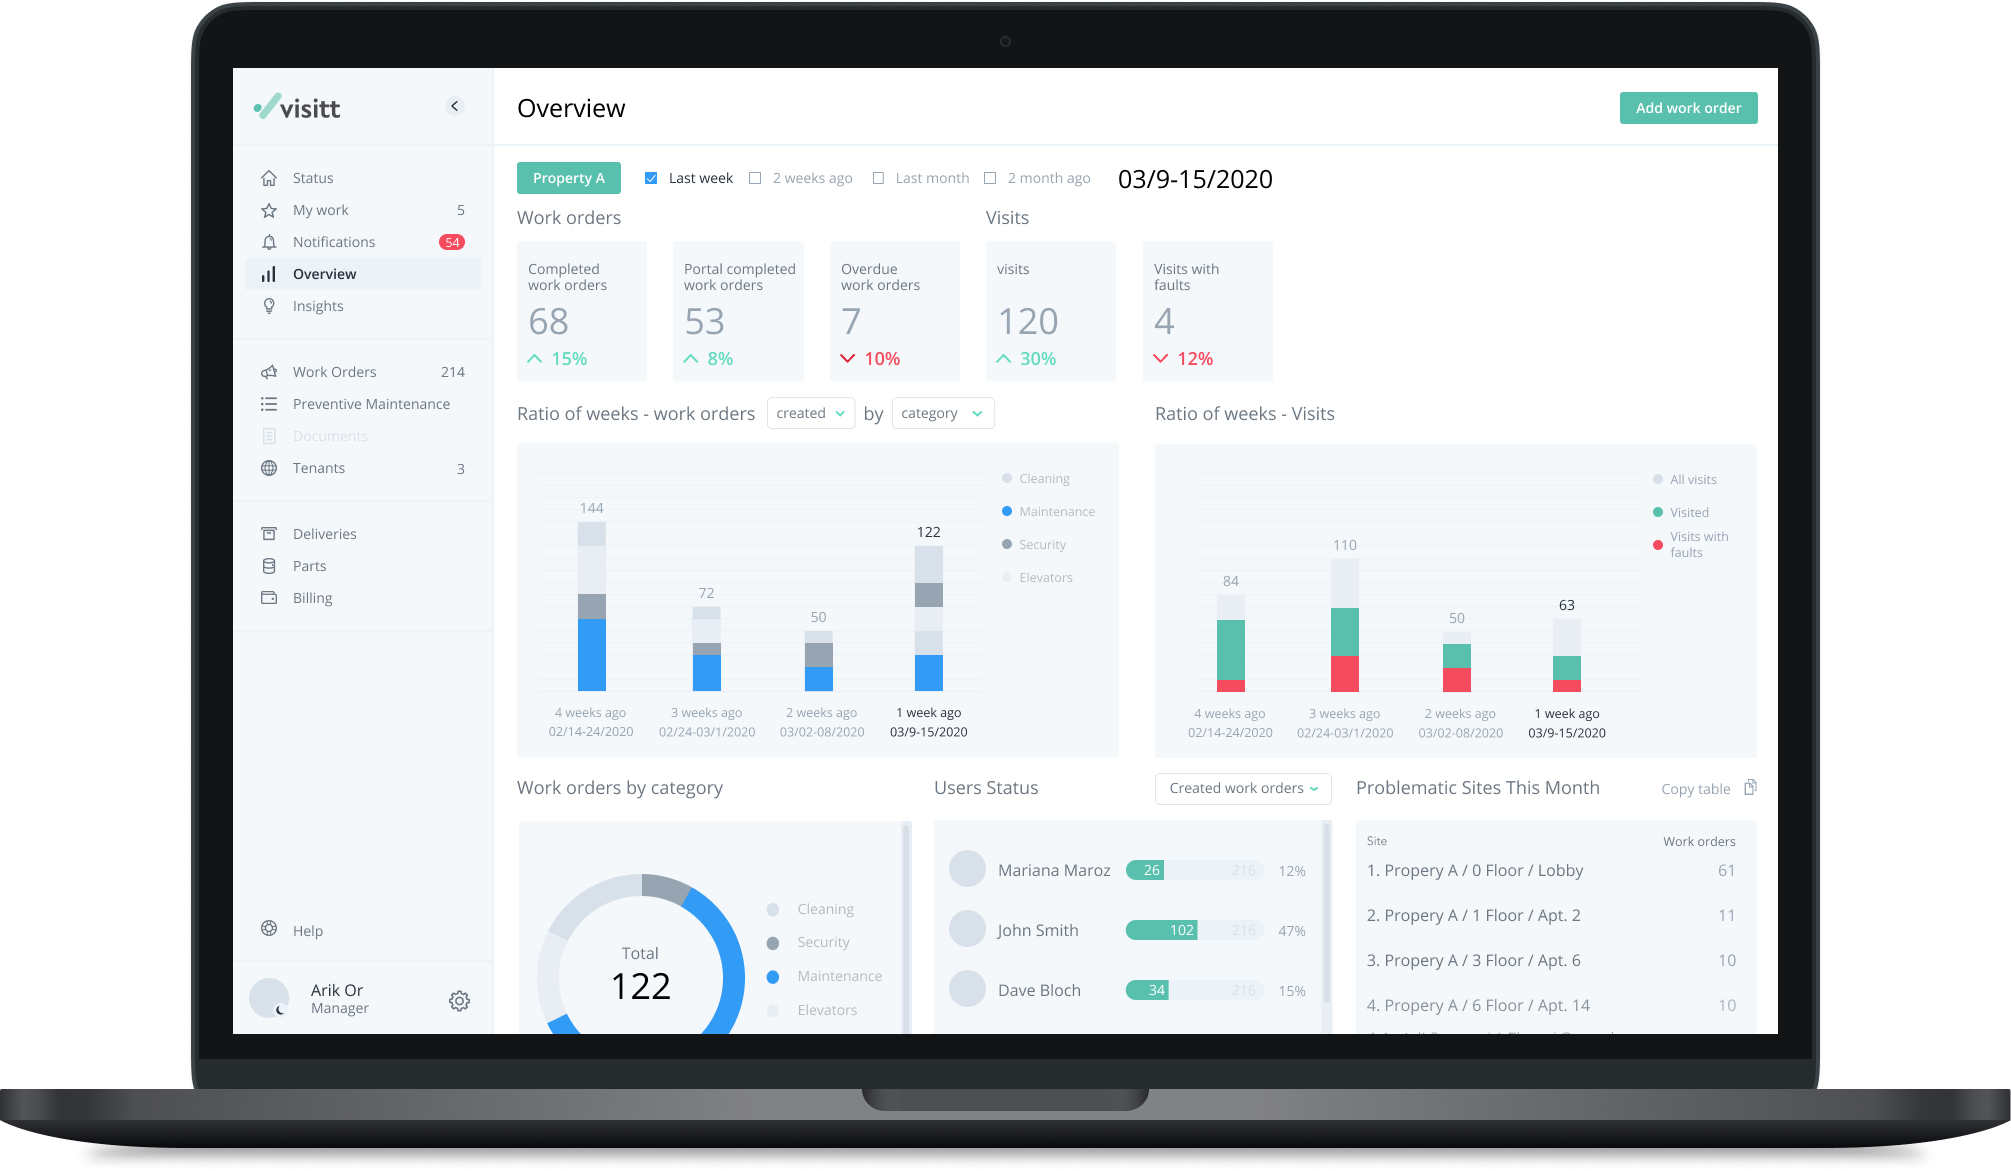 Smart Dashboards provide a quick and easy overview across your assets, teams, sites, and portfolio.